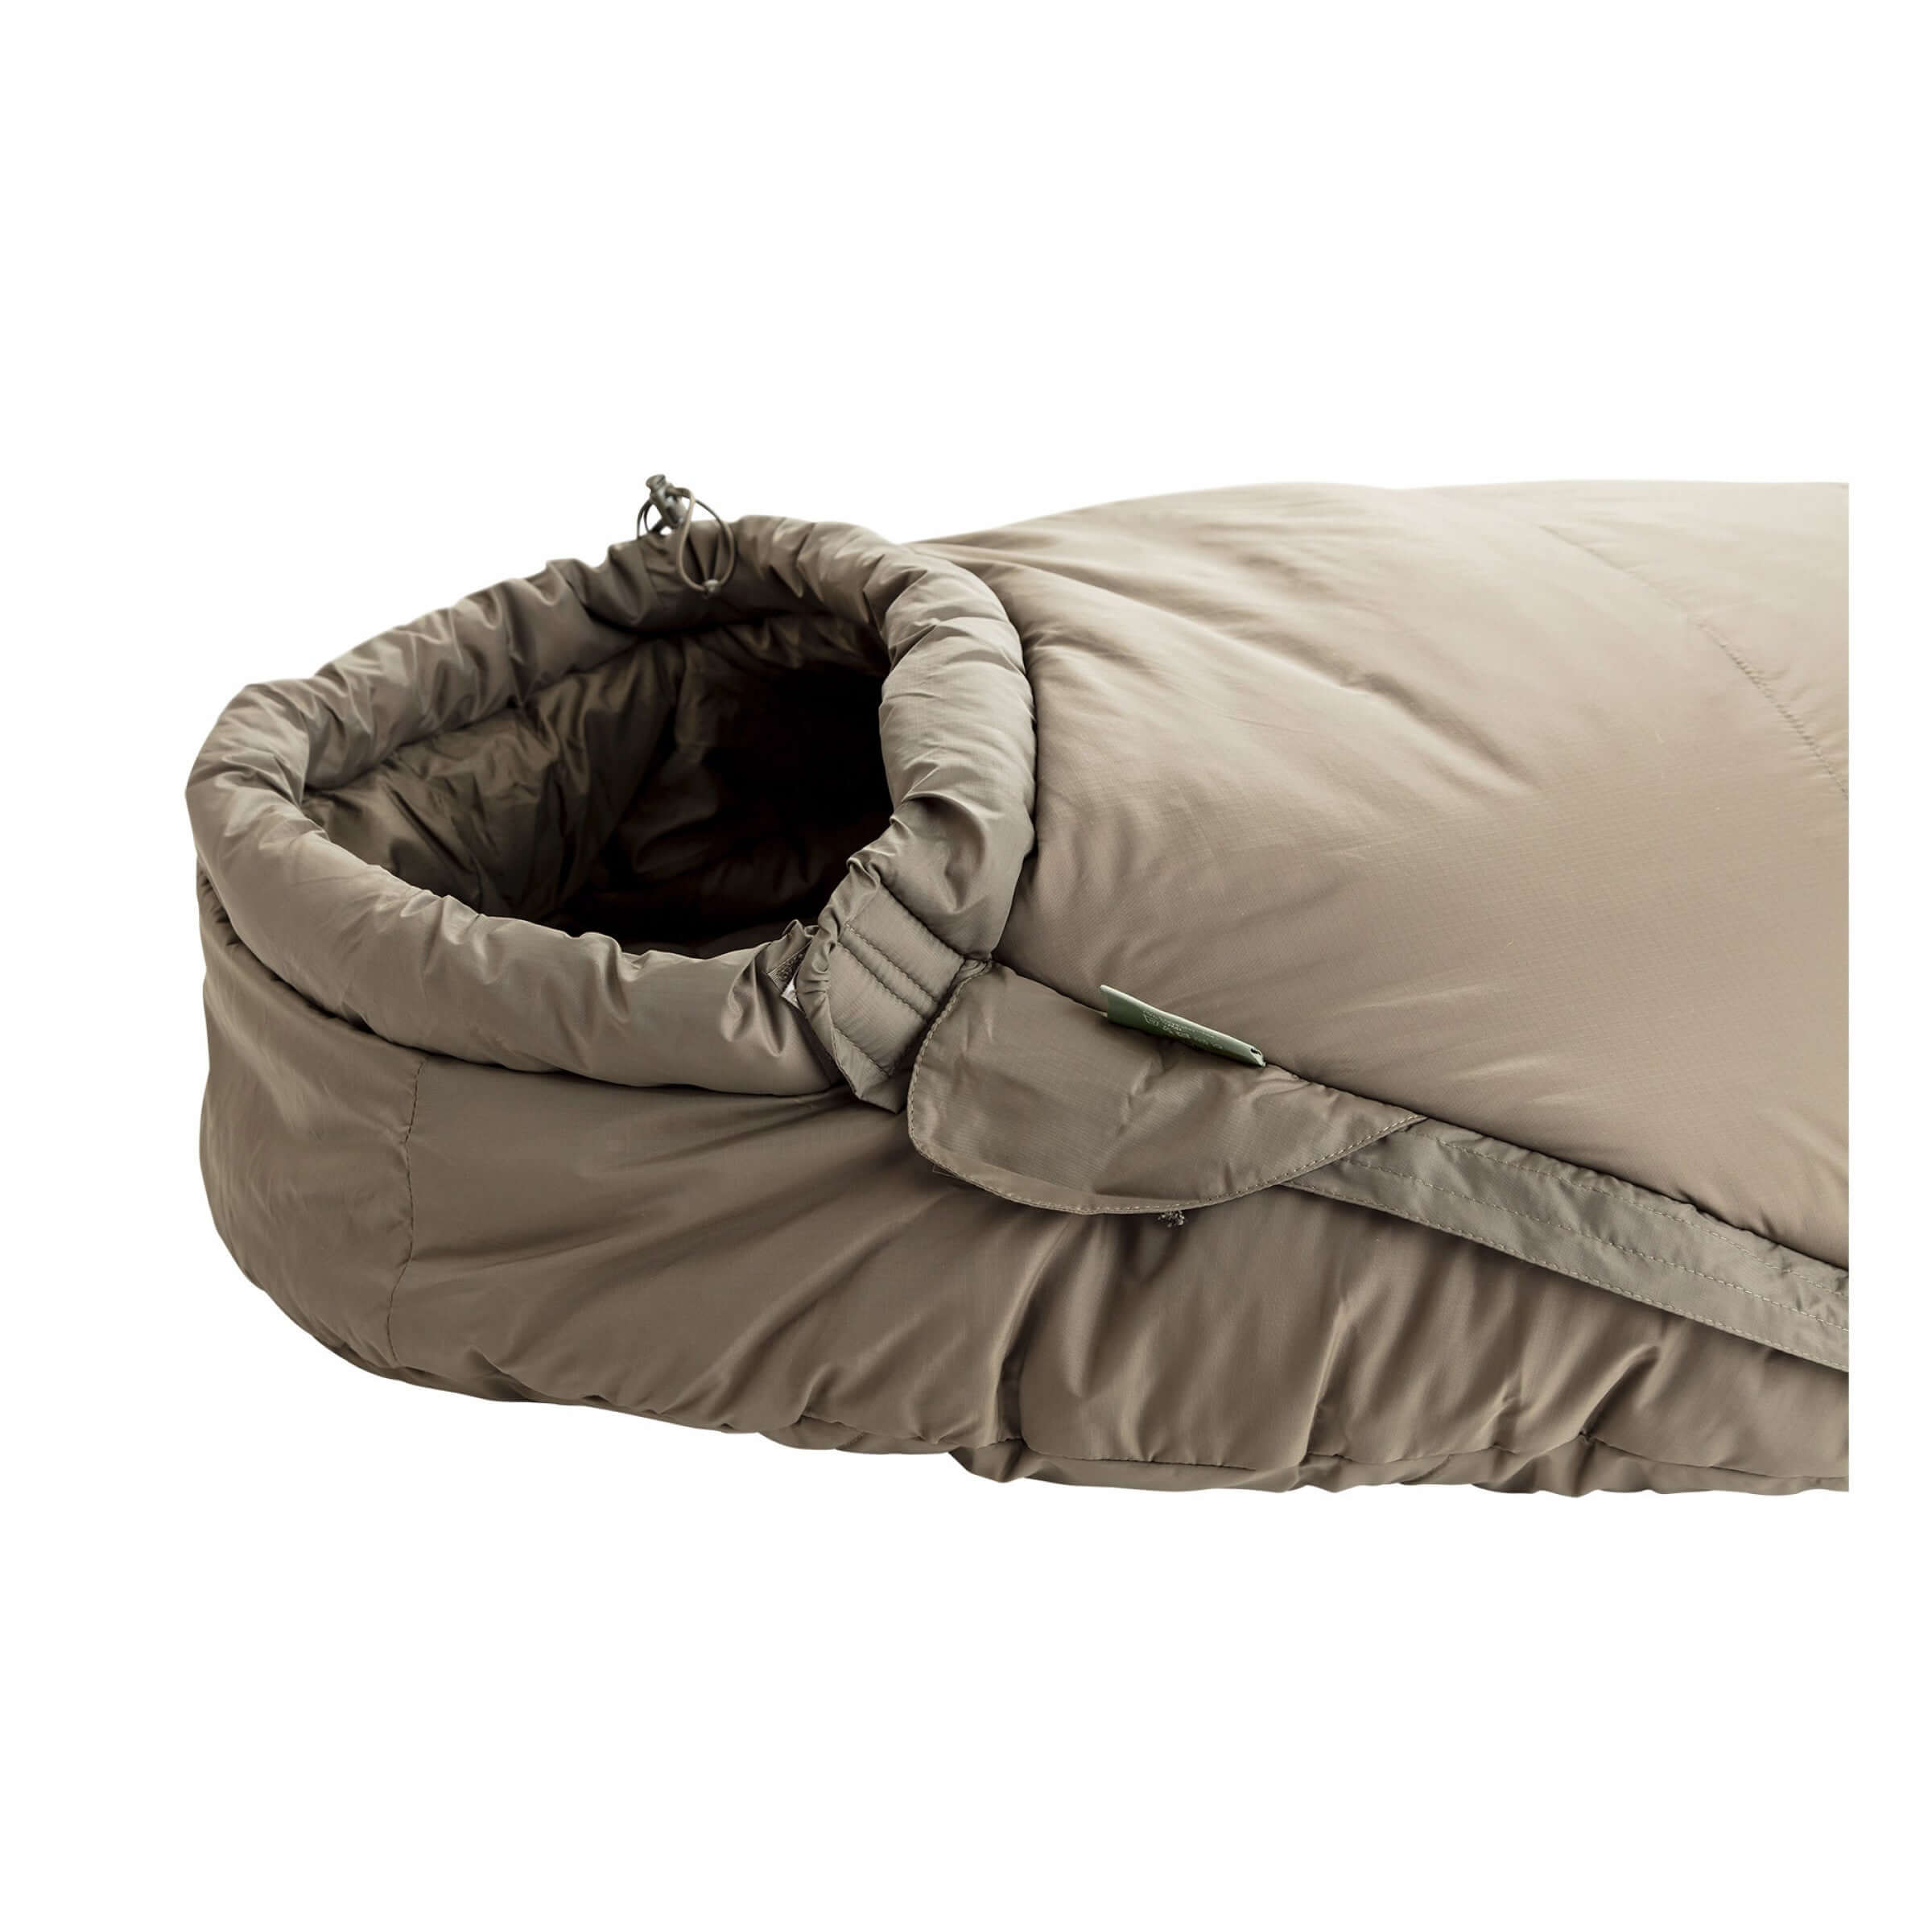 350 Xmf Cold Weather Cold Weather Military Sleeping Bag -15°C -25°C